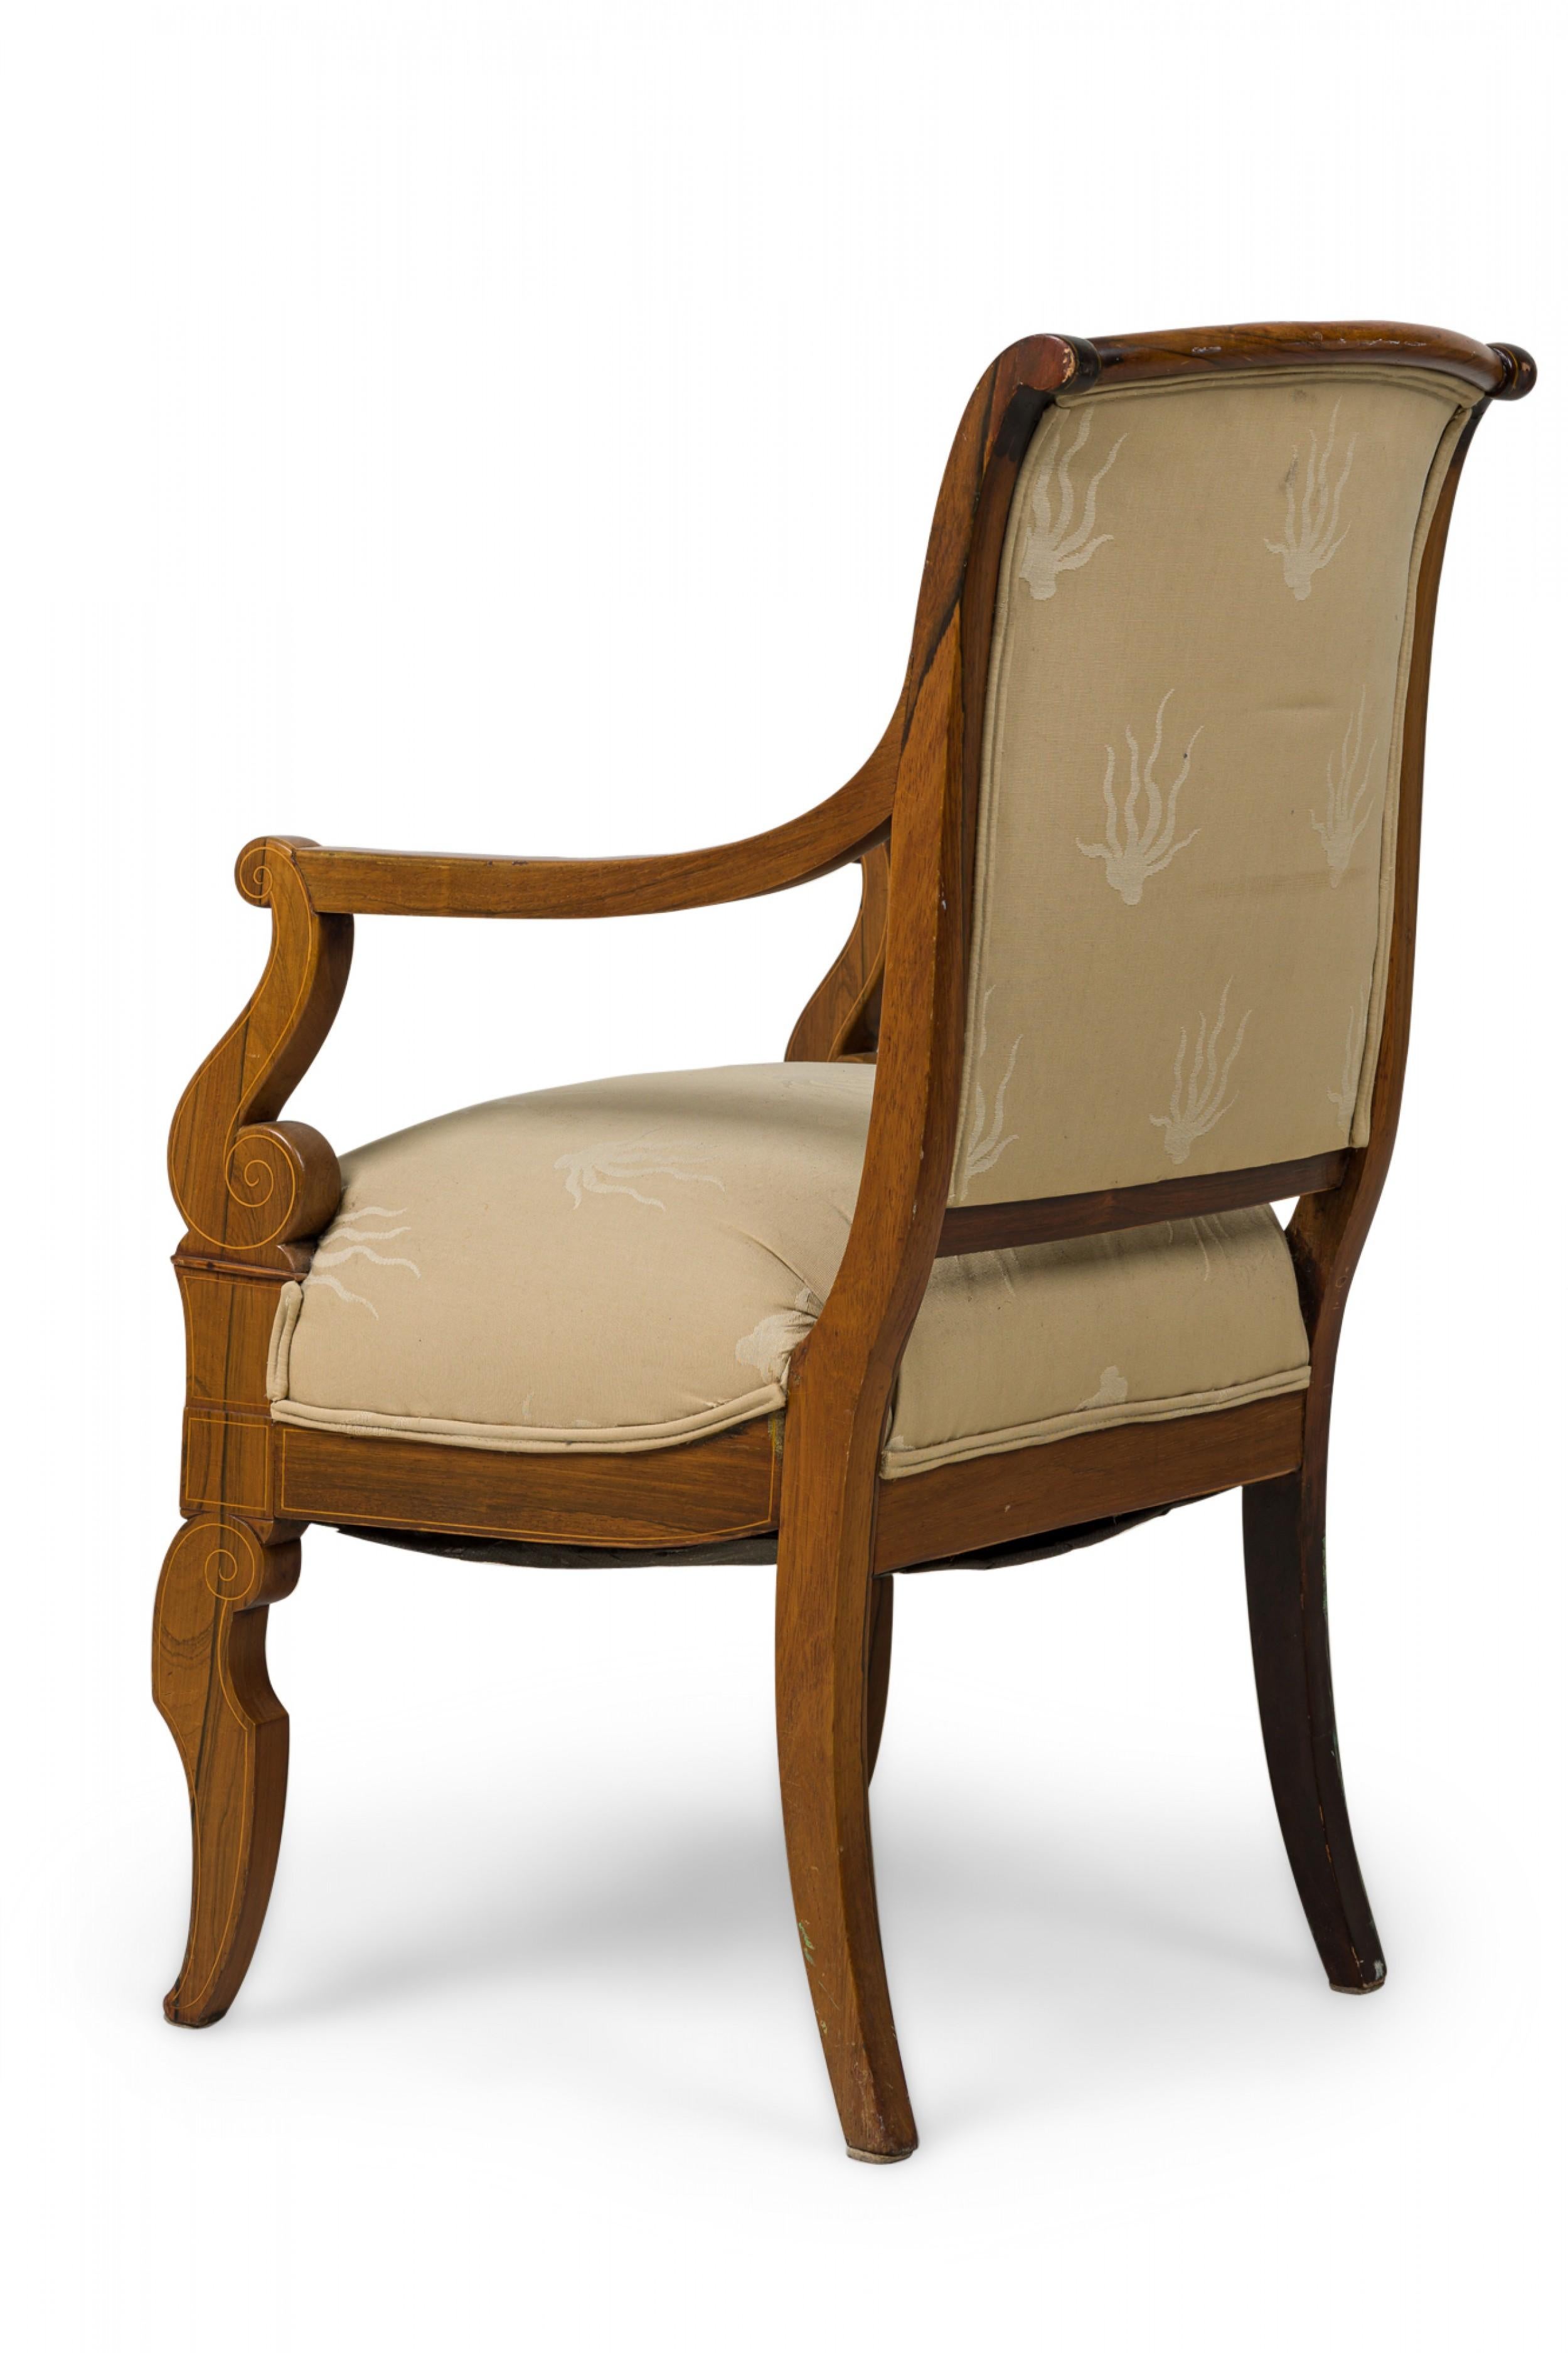 French Charles X Inlaid Mahogany and Walnut Open Armchair in Beige Upholstery In Good Condition For Sale In New York, NY